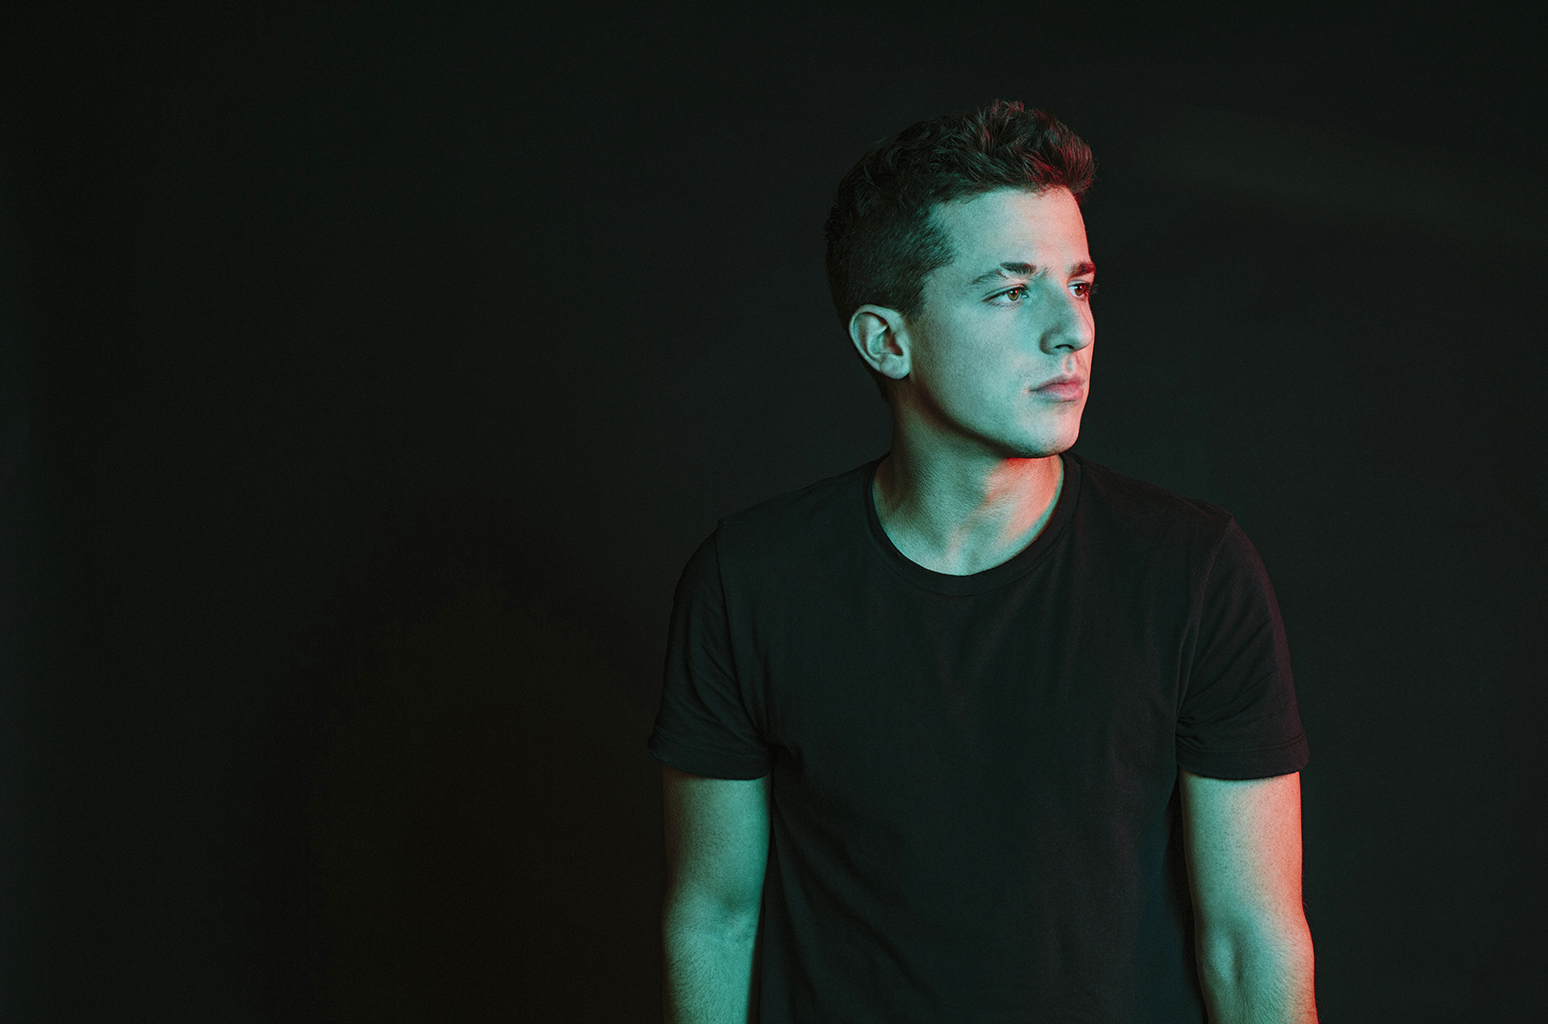 Charlie Puth teams up with Boyz II Men for a capella single, “If You Leave Me Now”